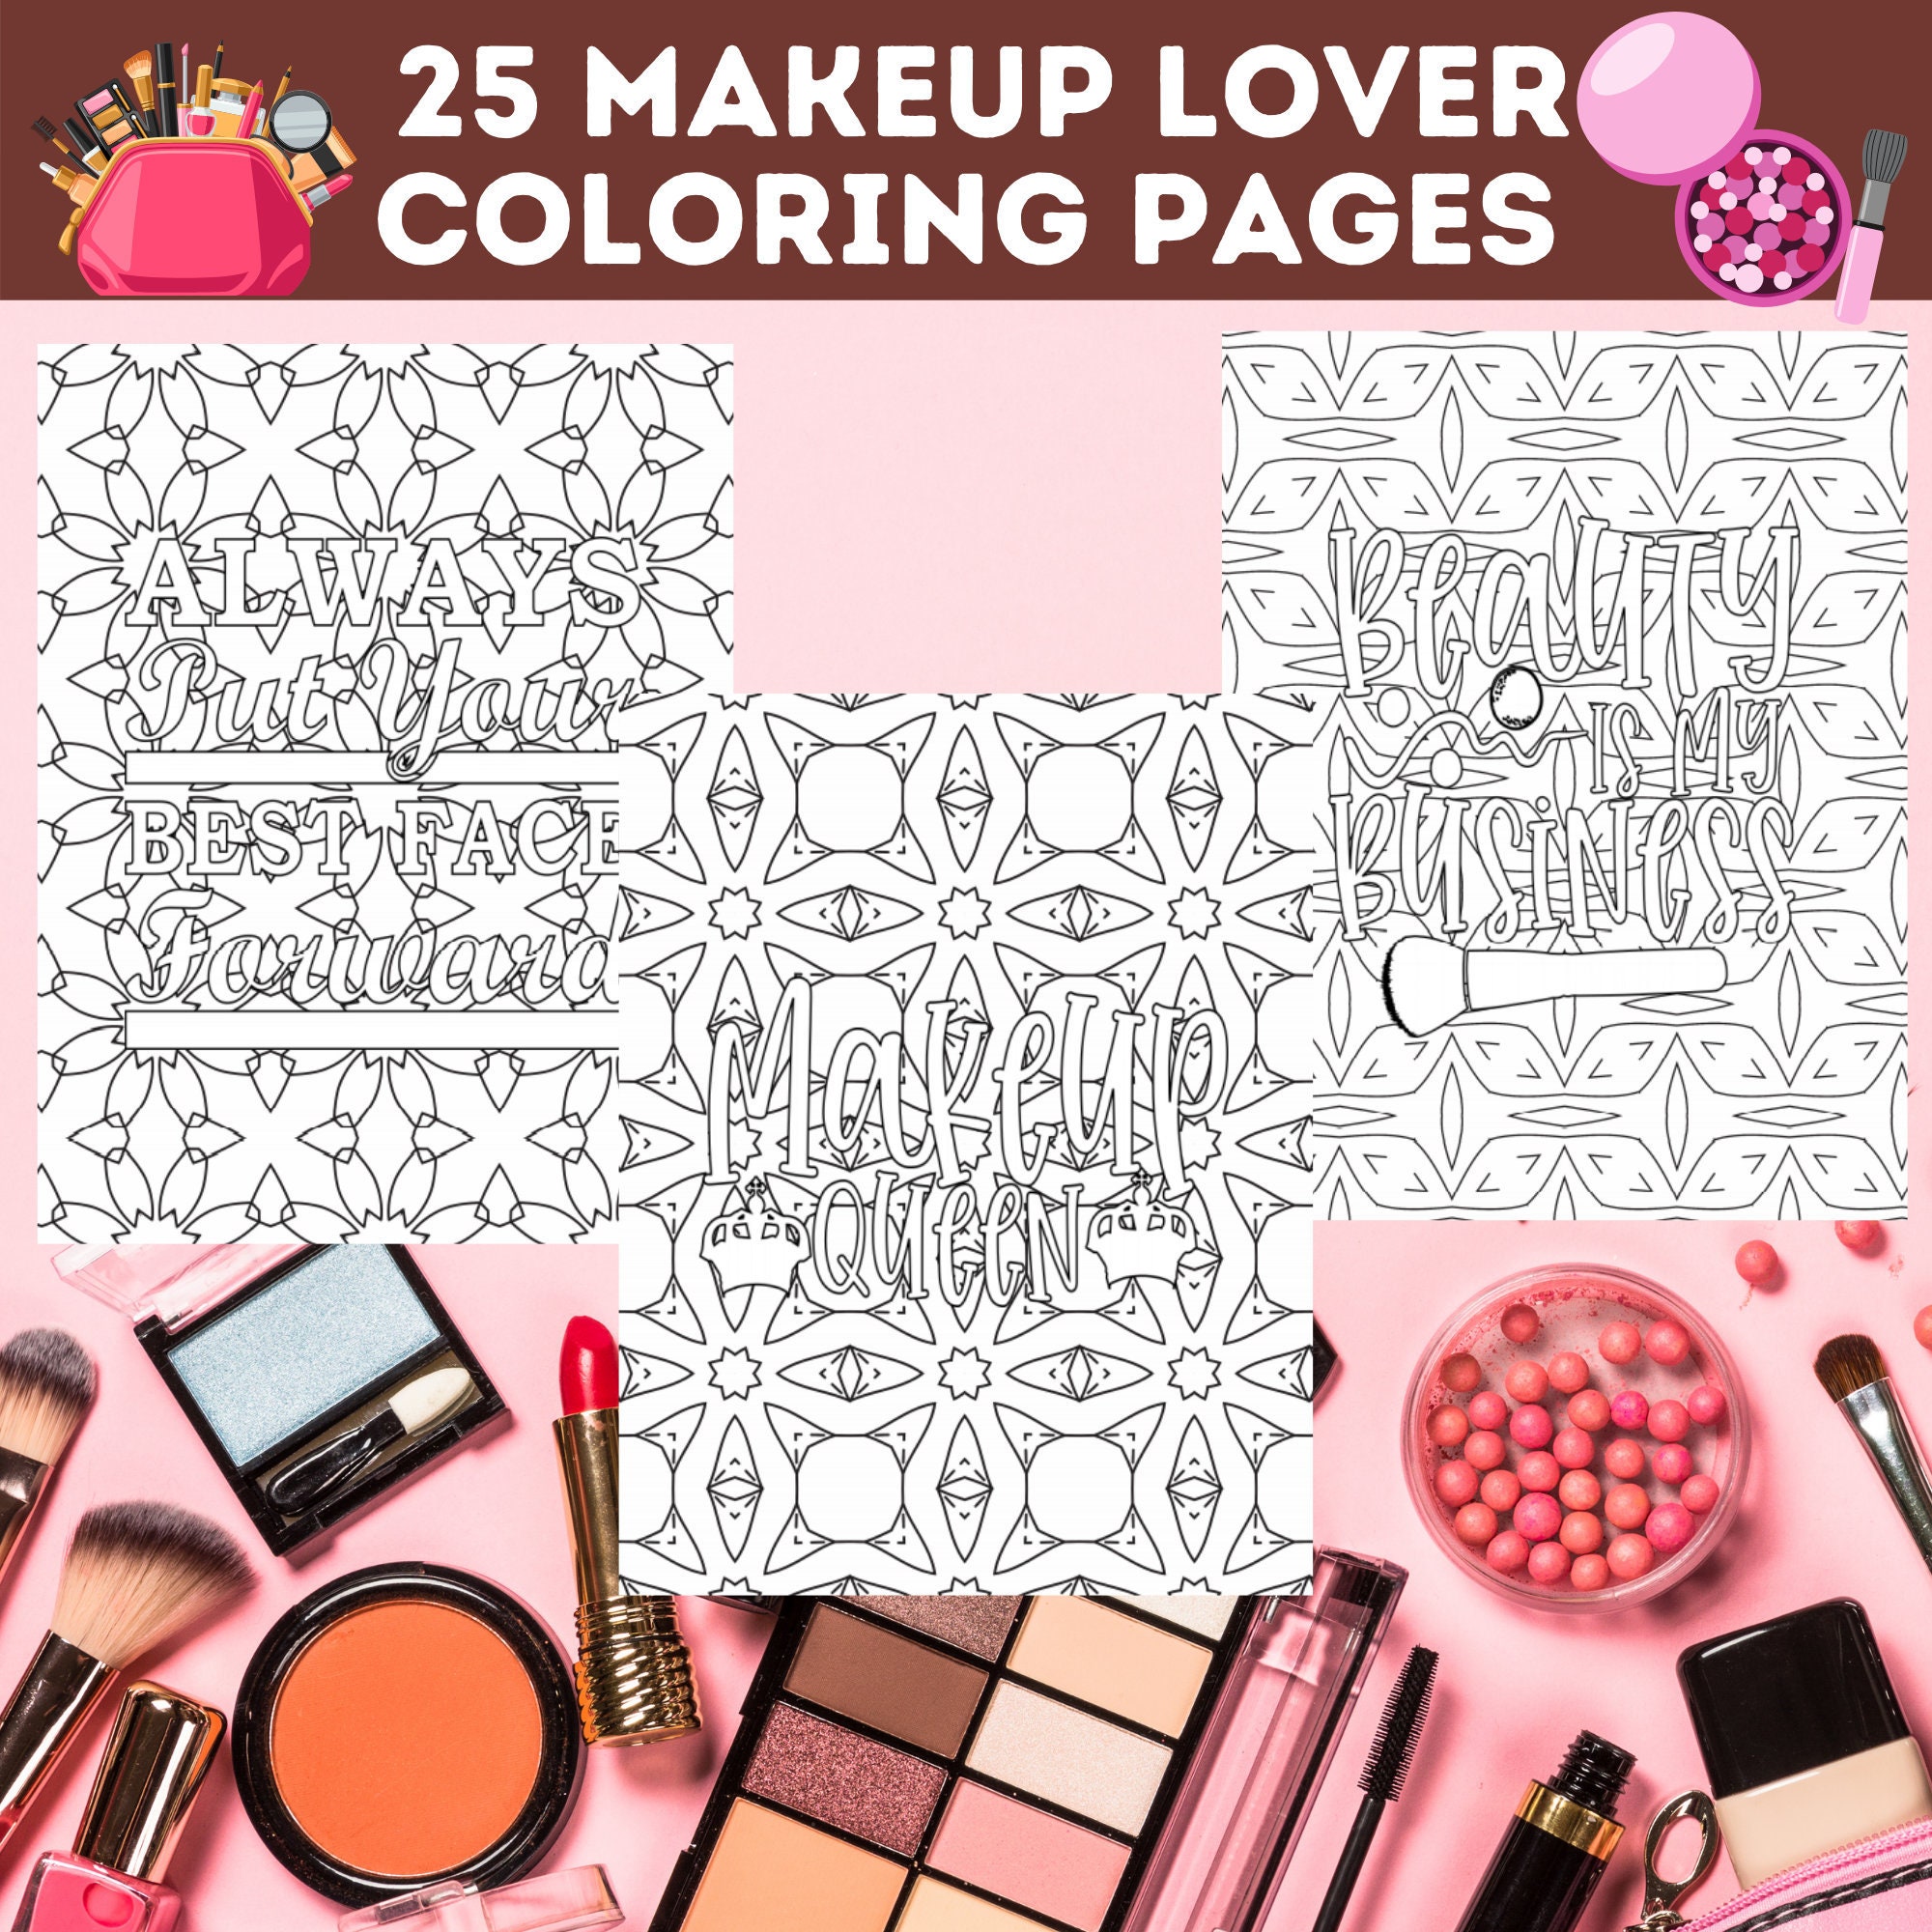 Makeup lover coloring pages bundle glamour makeup printable coloring pages for fashionistas and makeup lovers instant download